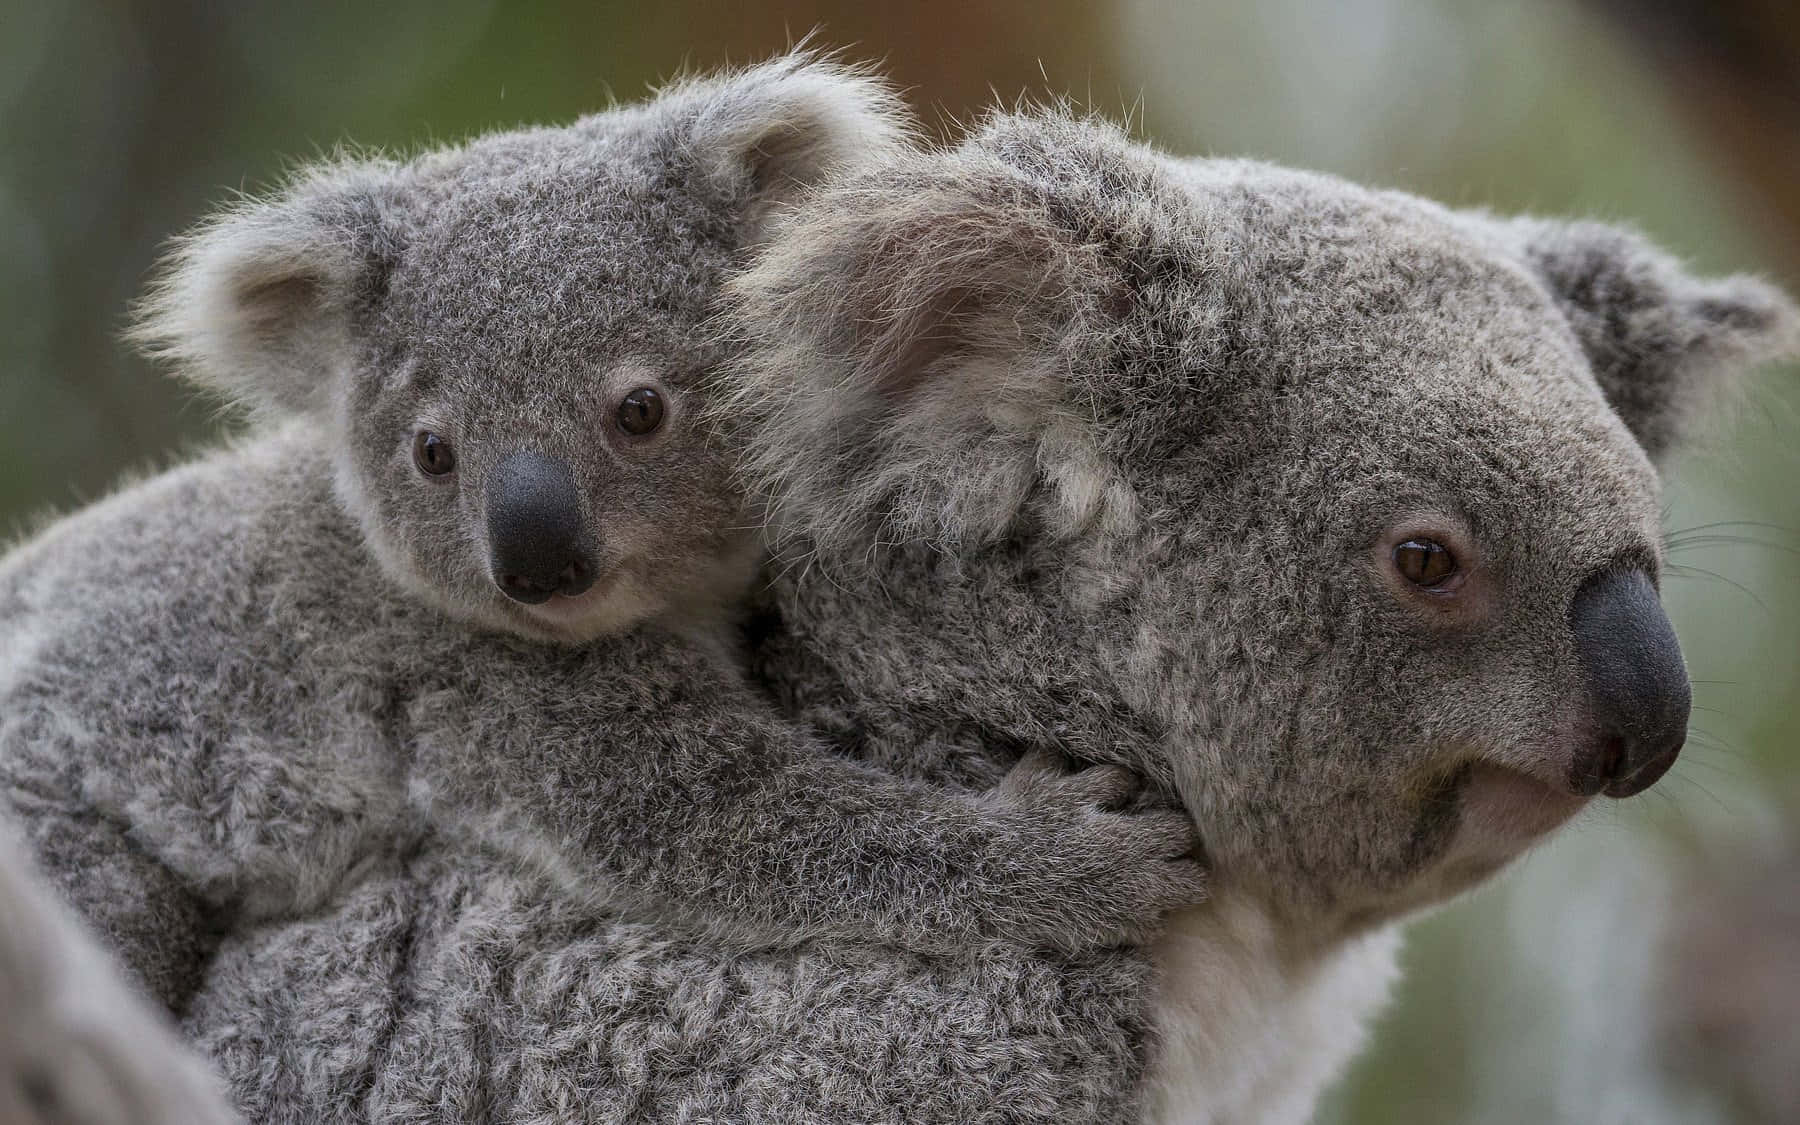 A mother koala carrying her young joey in her pouch